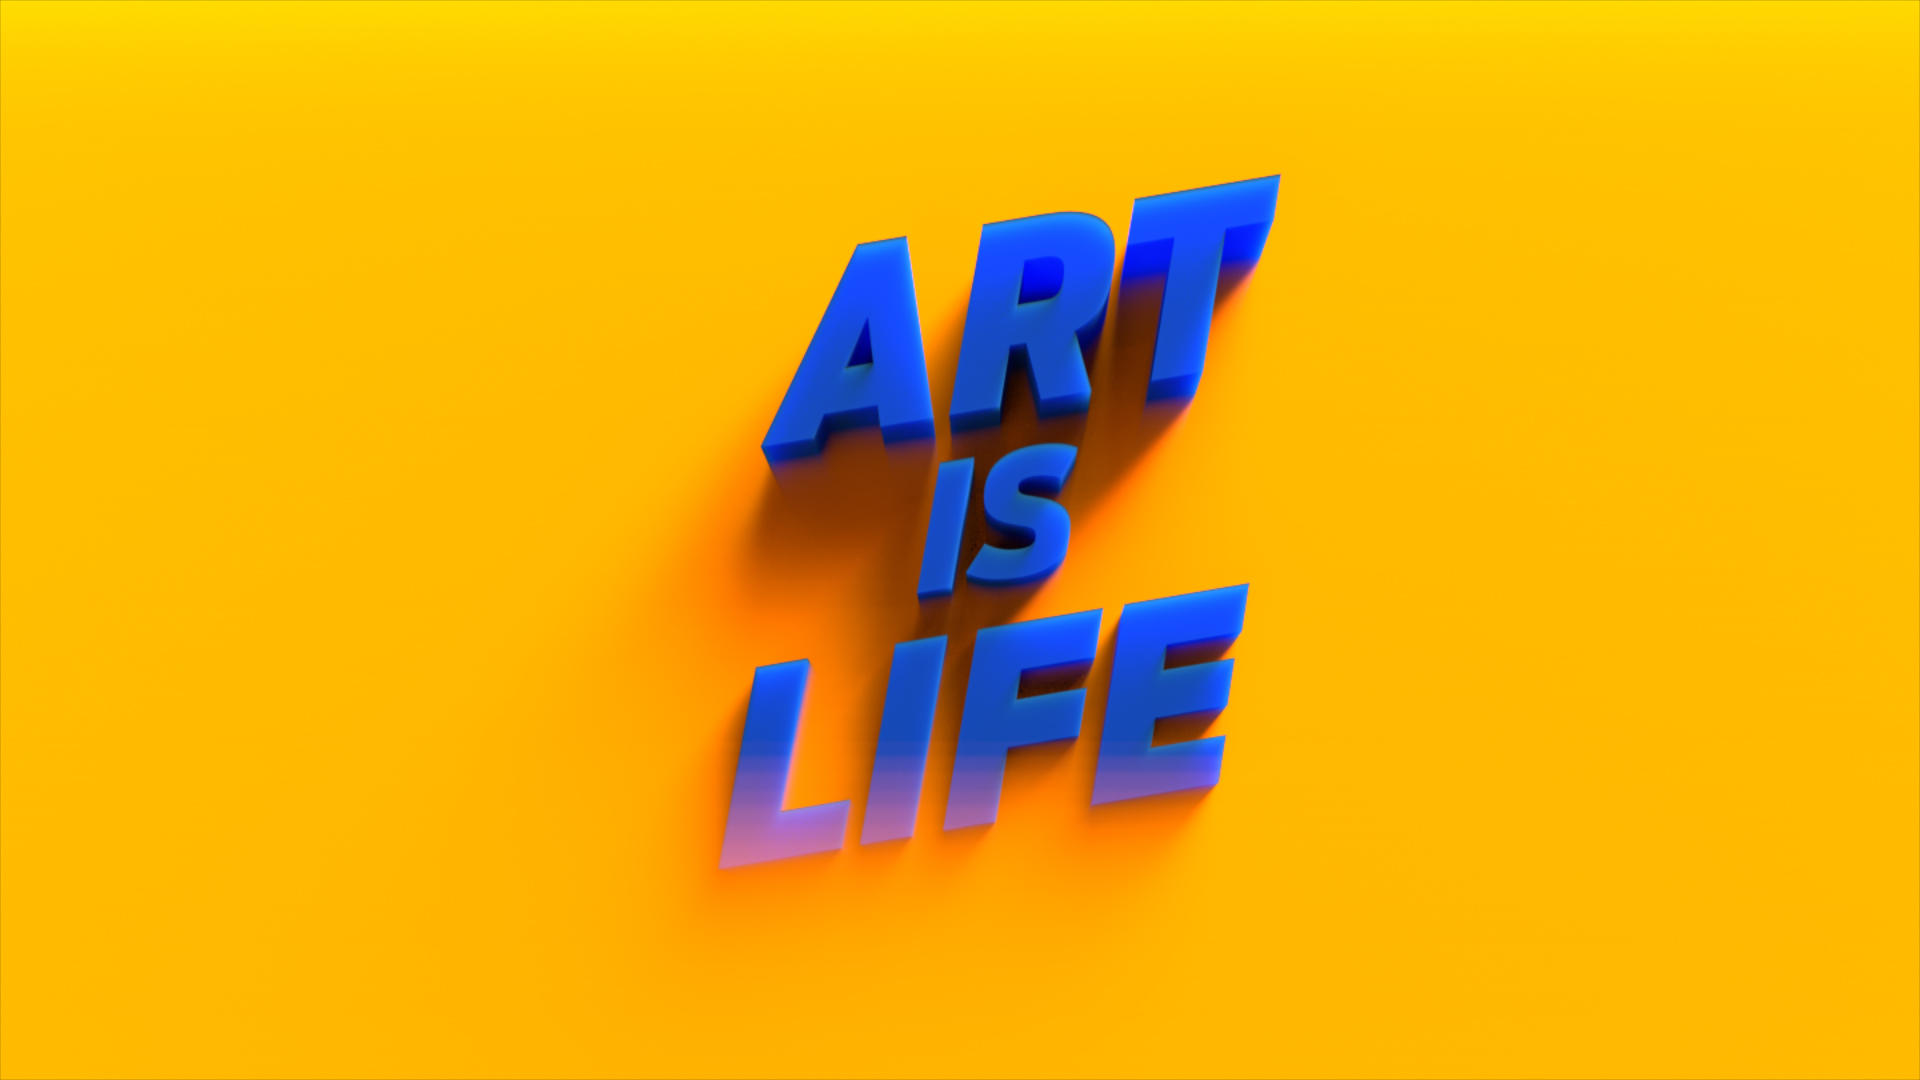 Altered TV motion graphics studio, London, Art is life animation explosion xparticles